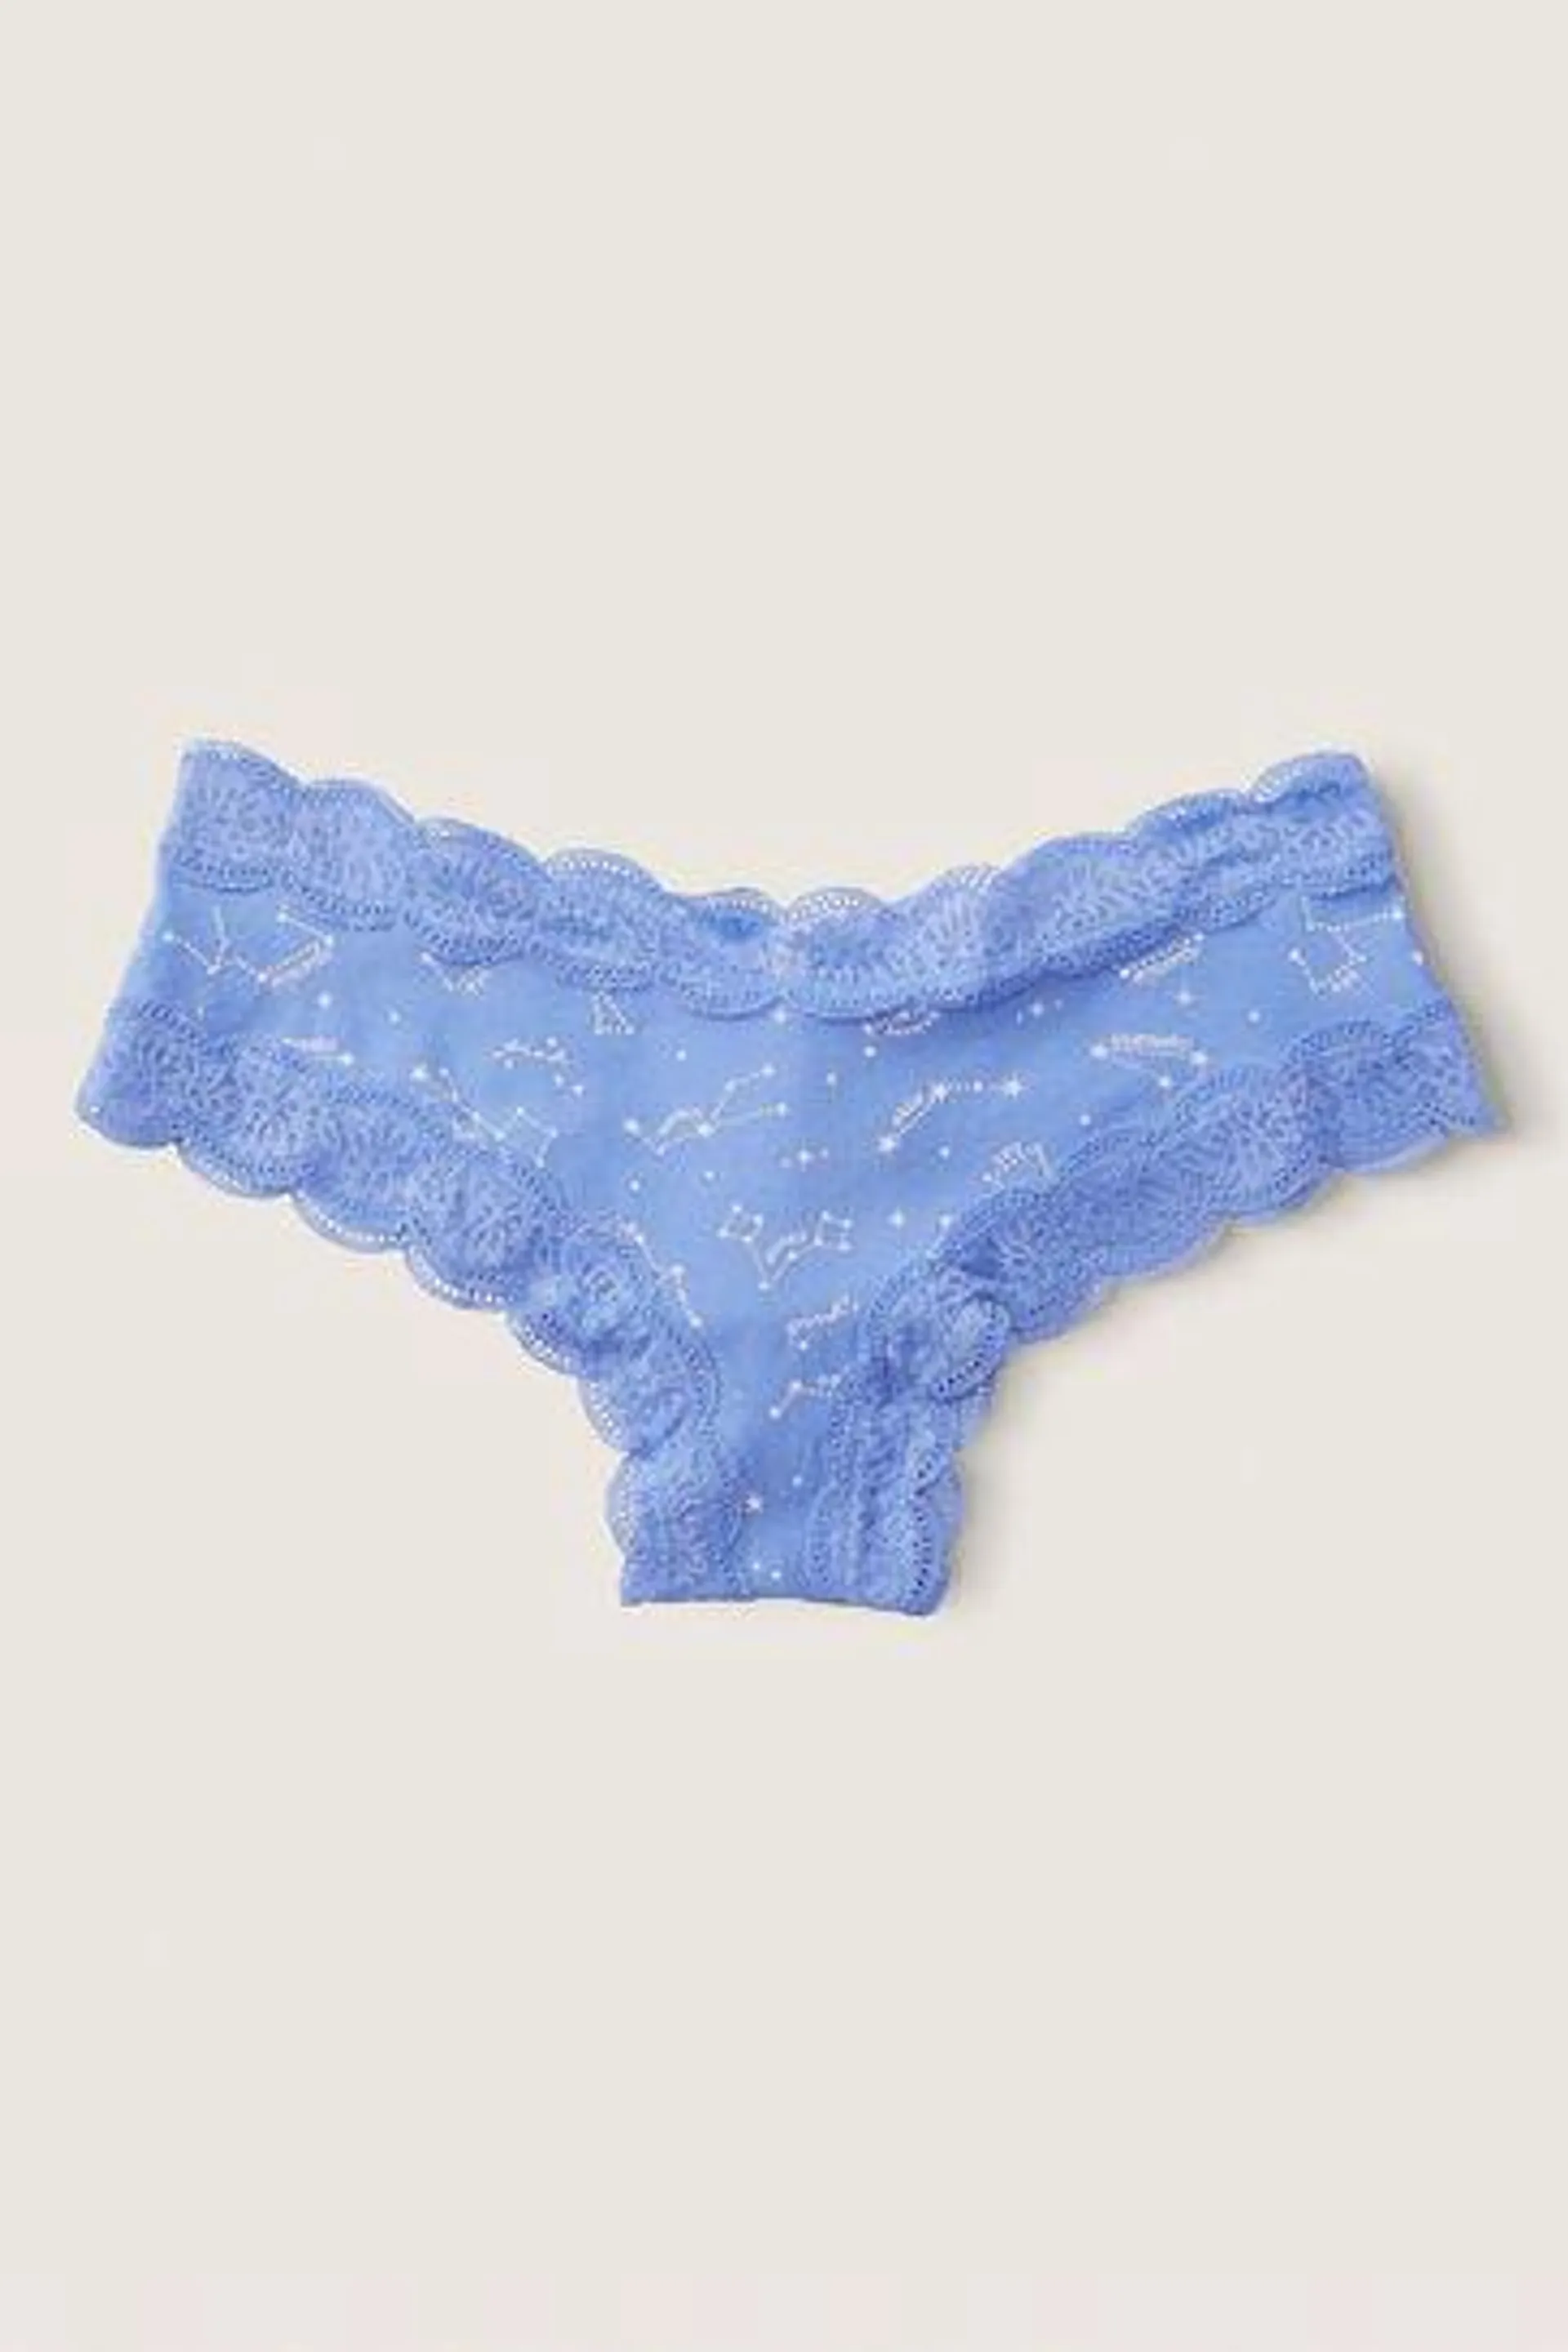 Stretch Cotton Lace Trim Cheeky Knickers